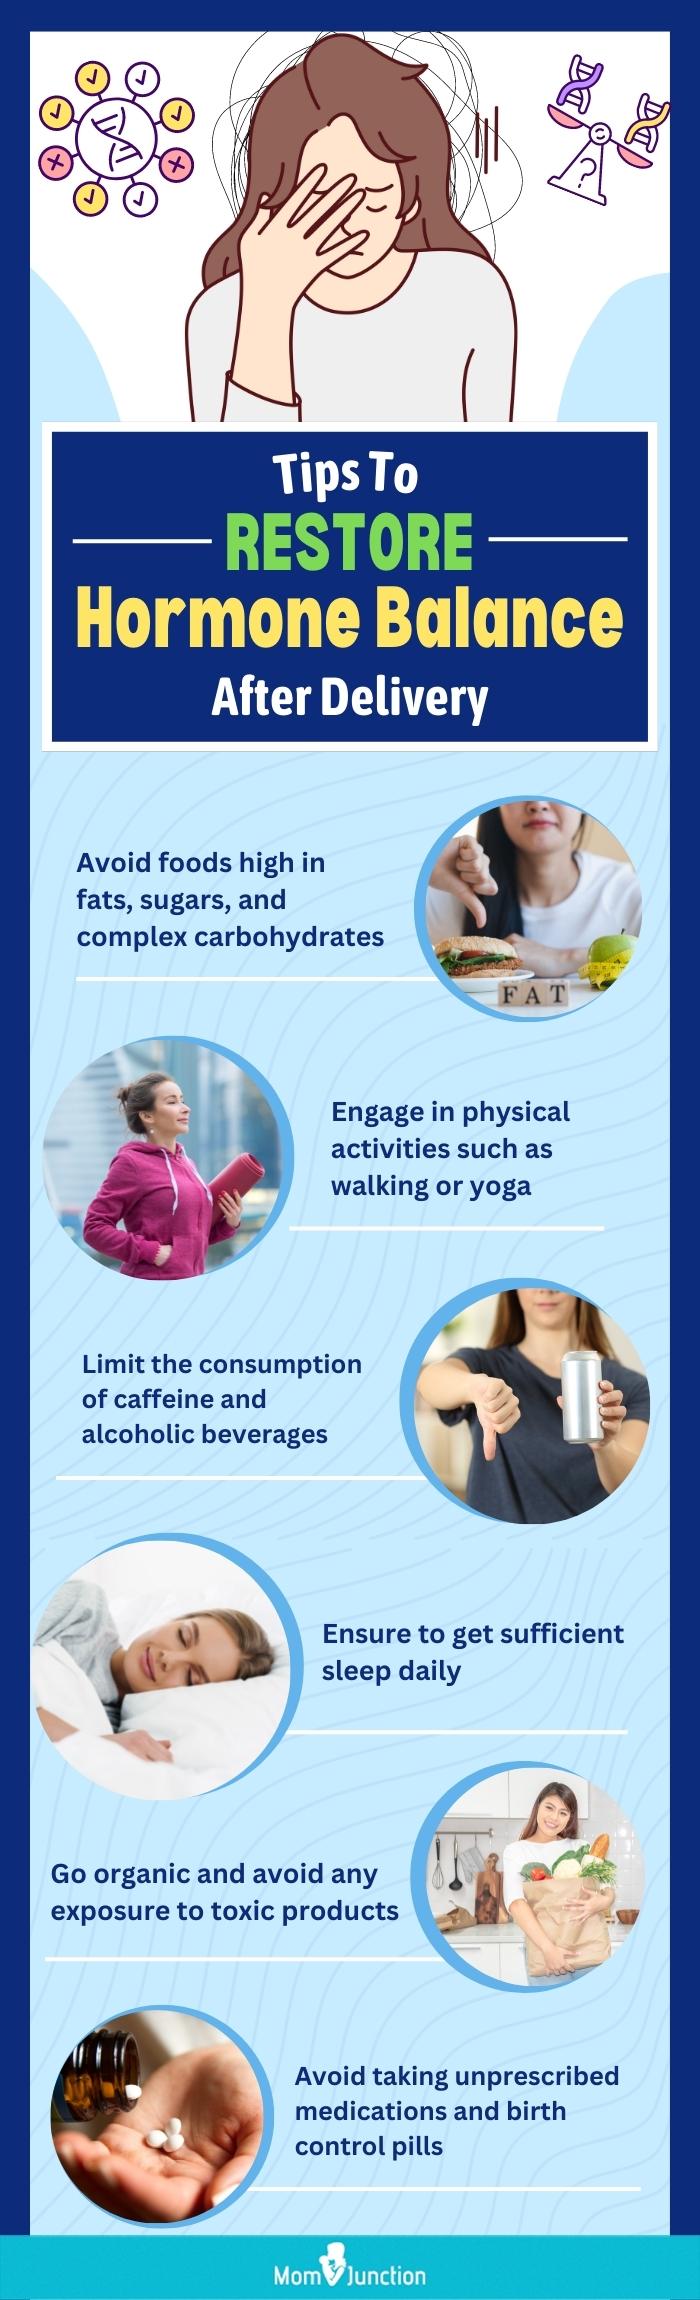 tips to restore hormone balance after delivery (infographic)